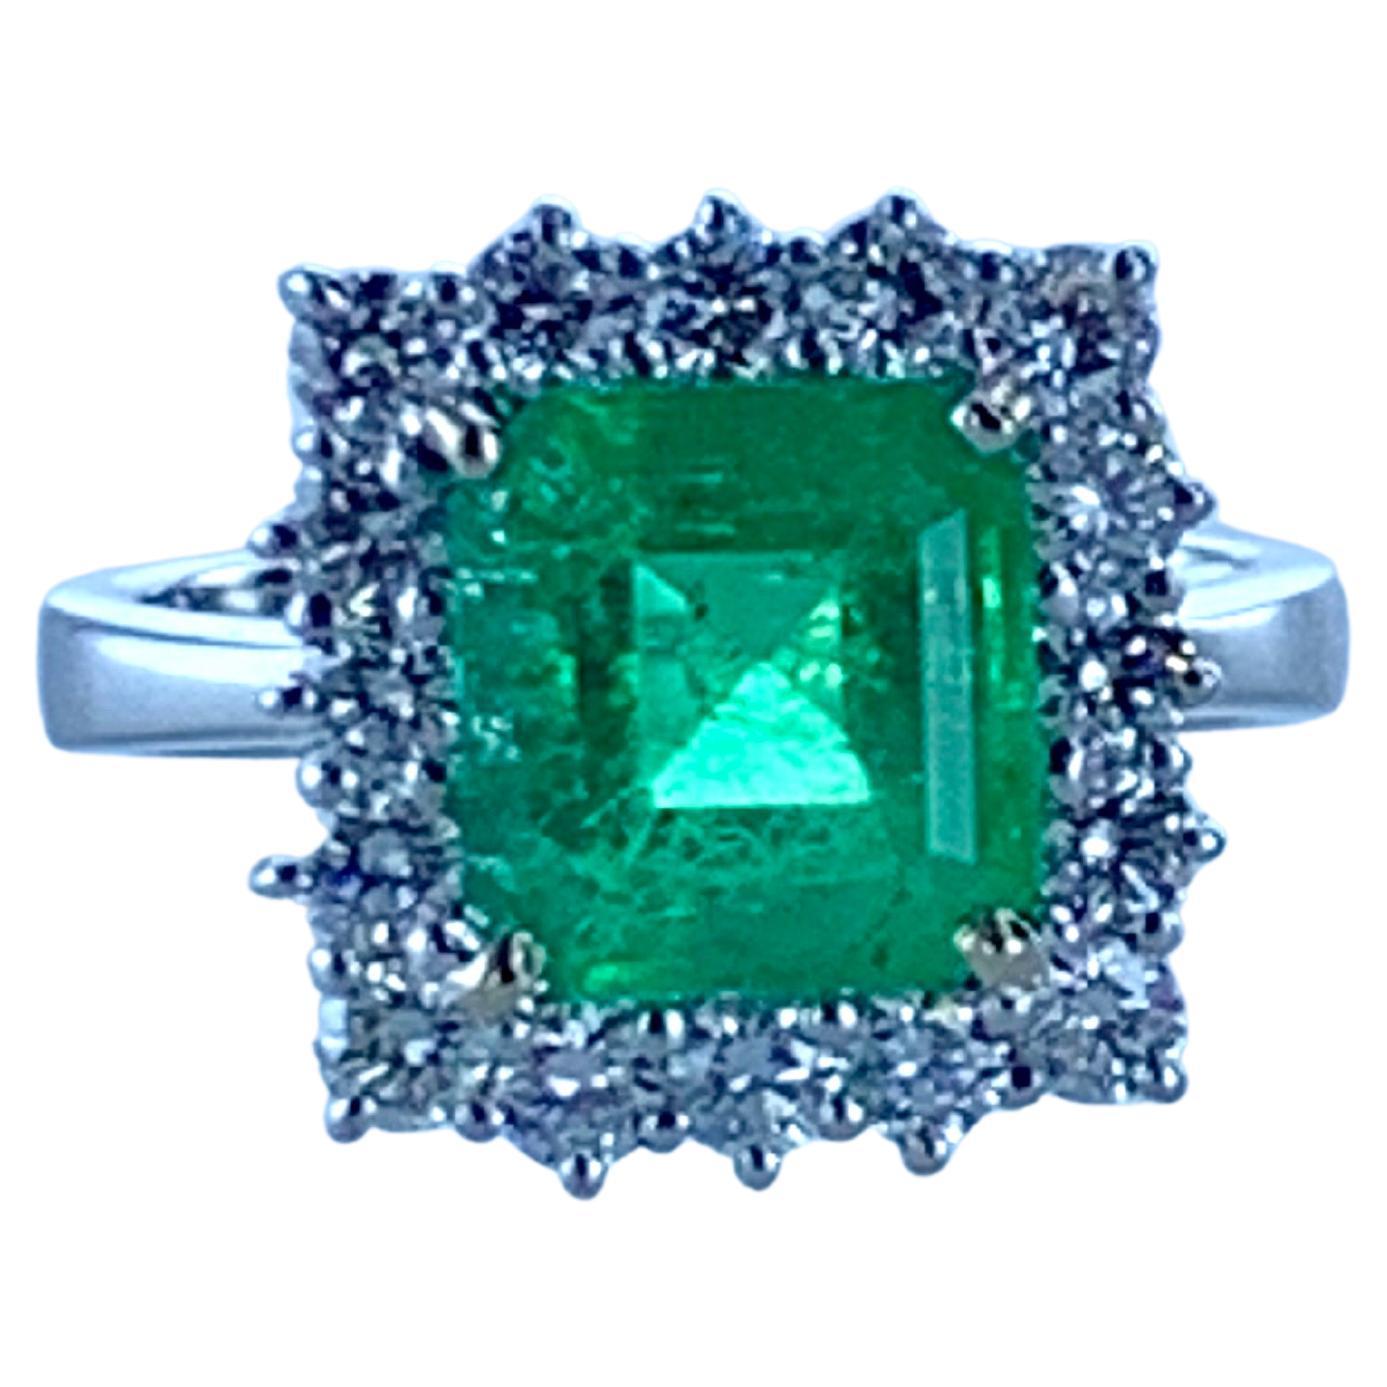 This  3.26 Carat Colombian Emerald and 1.02 Carat 18Kt White Gold Halo Diamond Ring, is both striking and a real statement on the hand. 

The square cut emerald is clear in color radiating a beautiful green, and surrounded by white diamonds in a